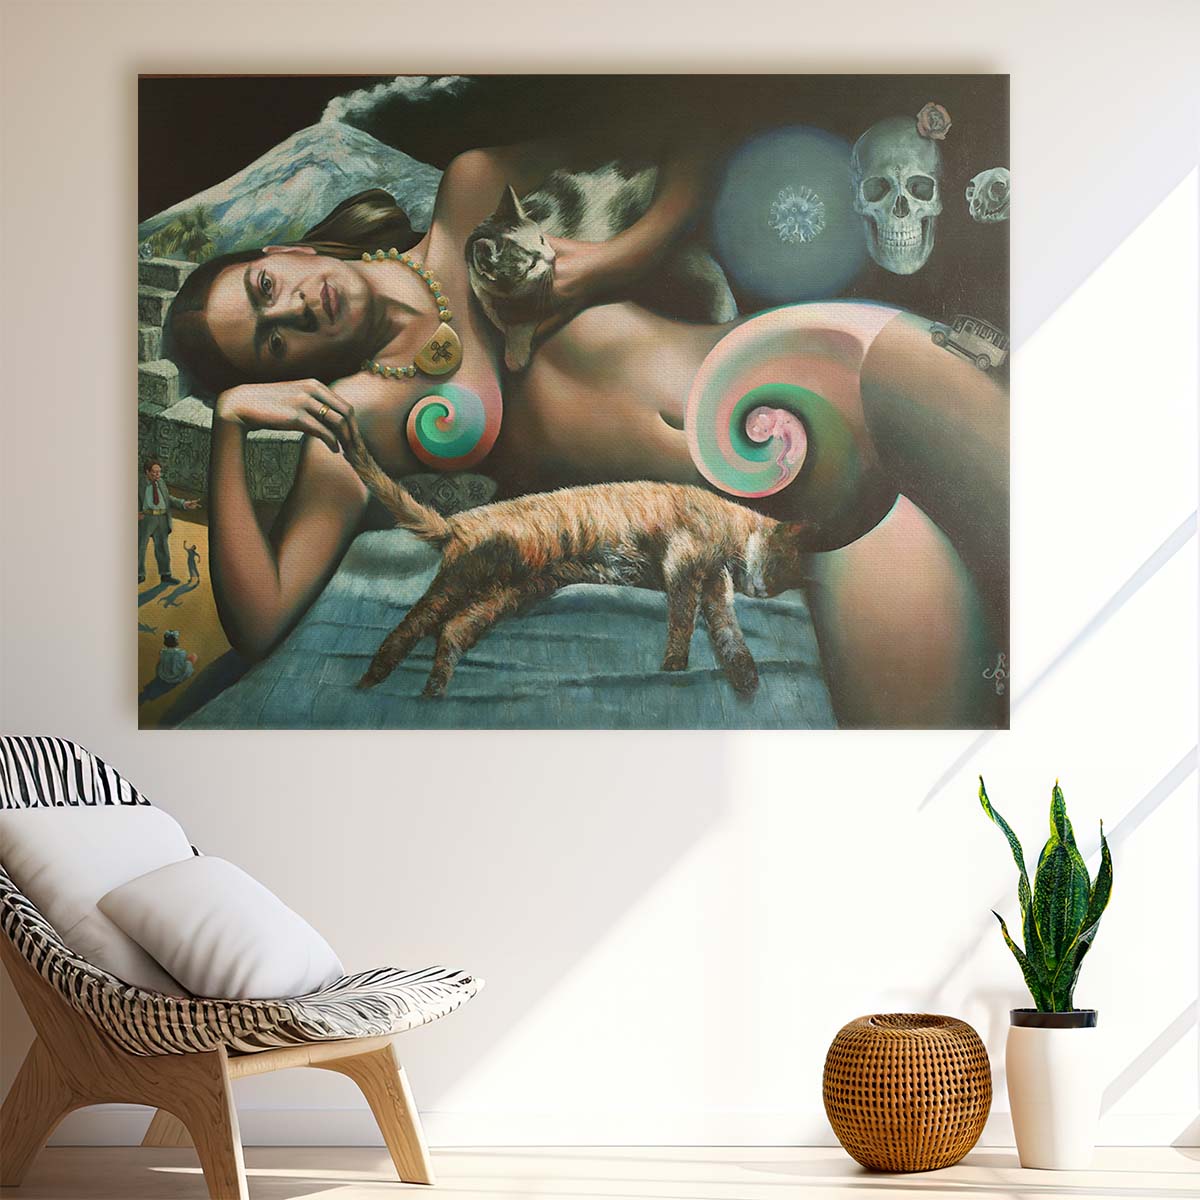 Frida Kahlo Surrealist Cubist Fantasy Oil Wall Art by Luxuriance Designs. Made in USA.